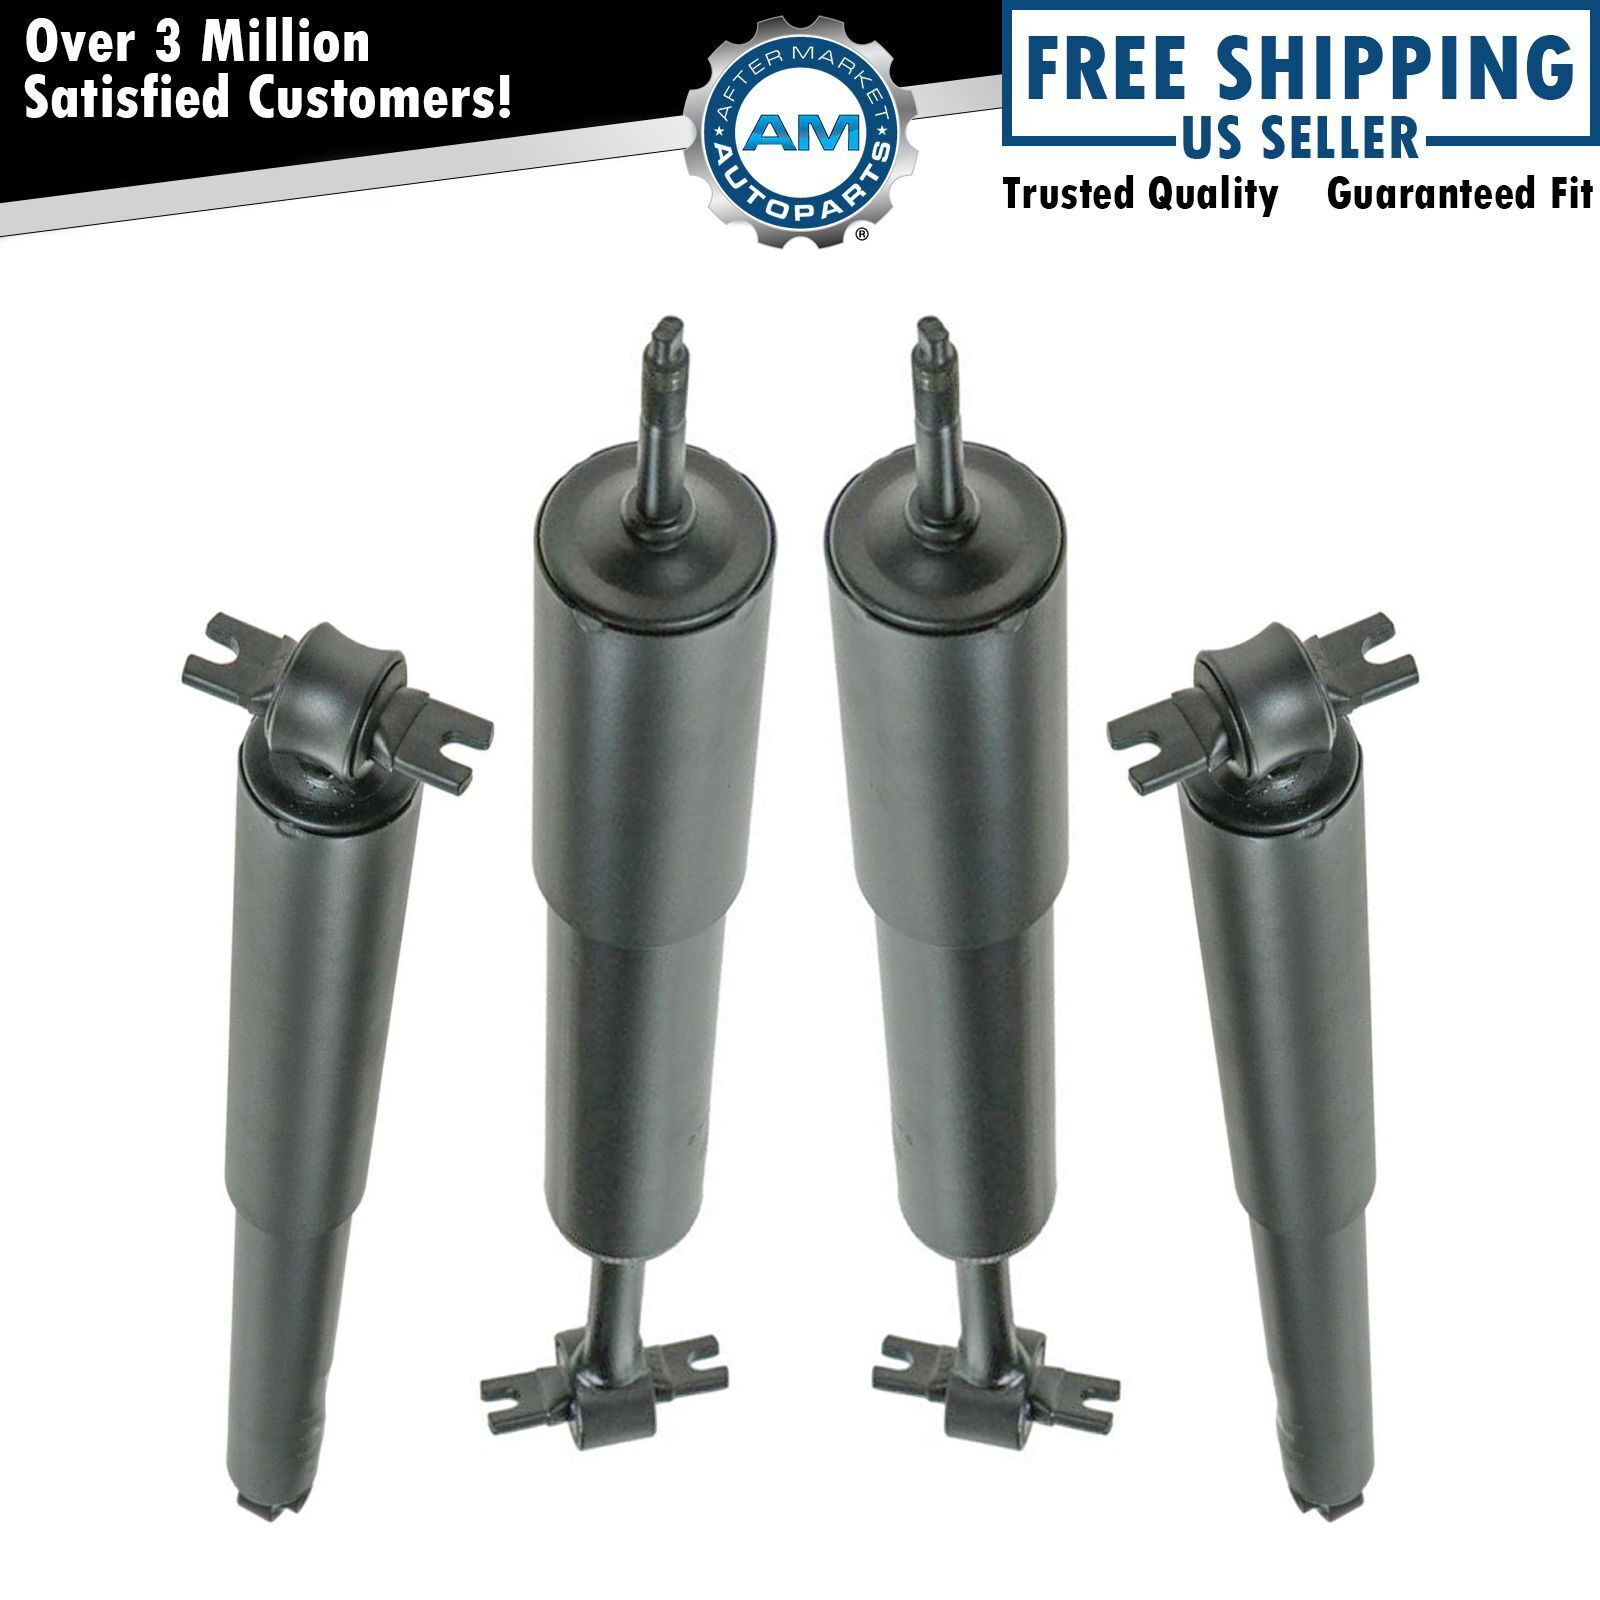 Strut Shock Front & Rear Kit Set of 4 for Ford Explorer Sport Trac Mountaineer